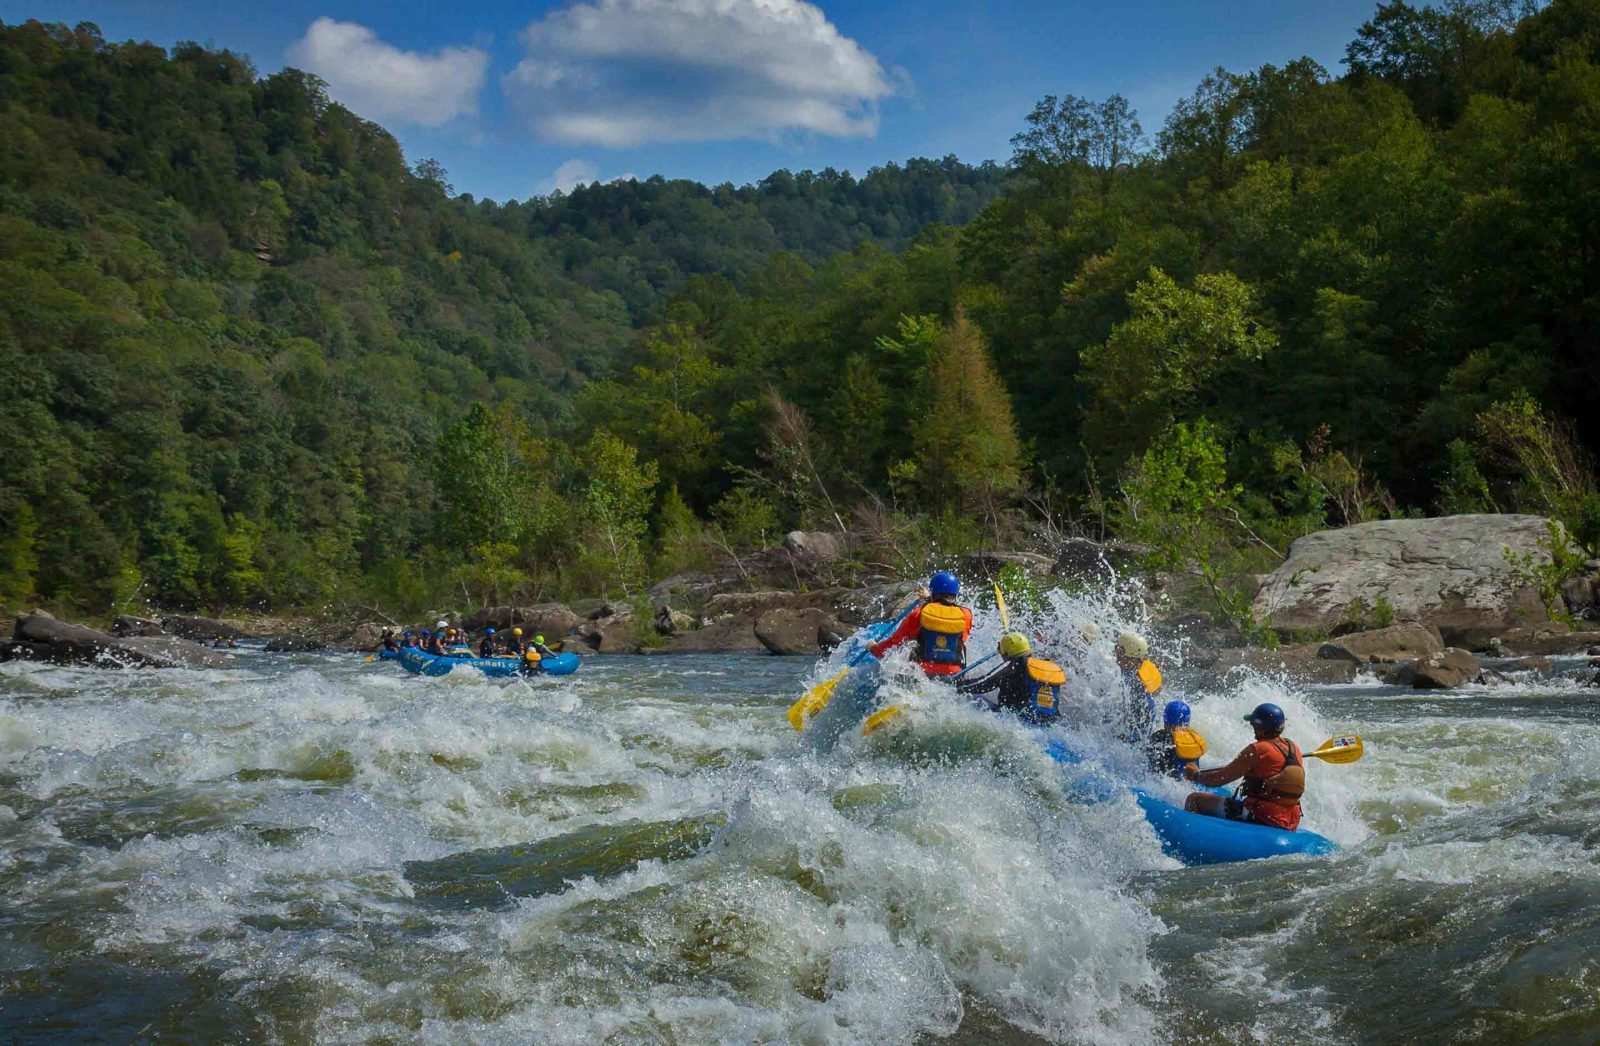 An ACE raft bursts through a wave on the Lower Gauley River whitewater rafting in West Virginia.